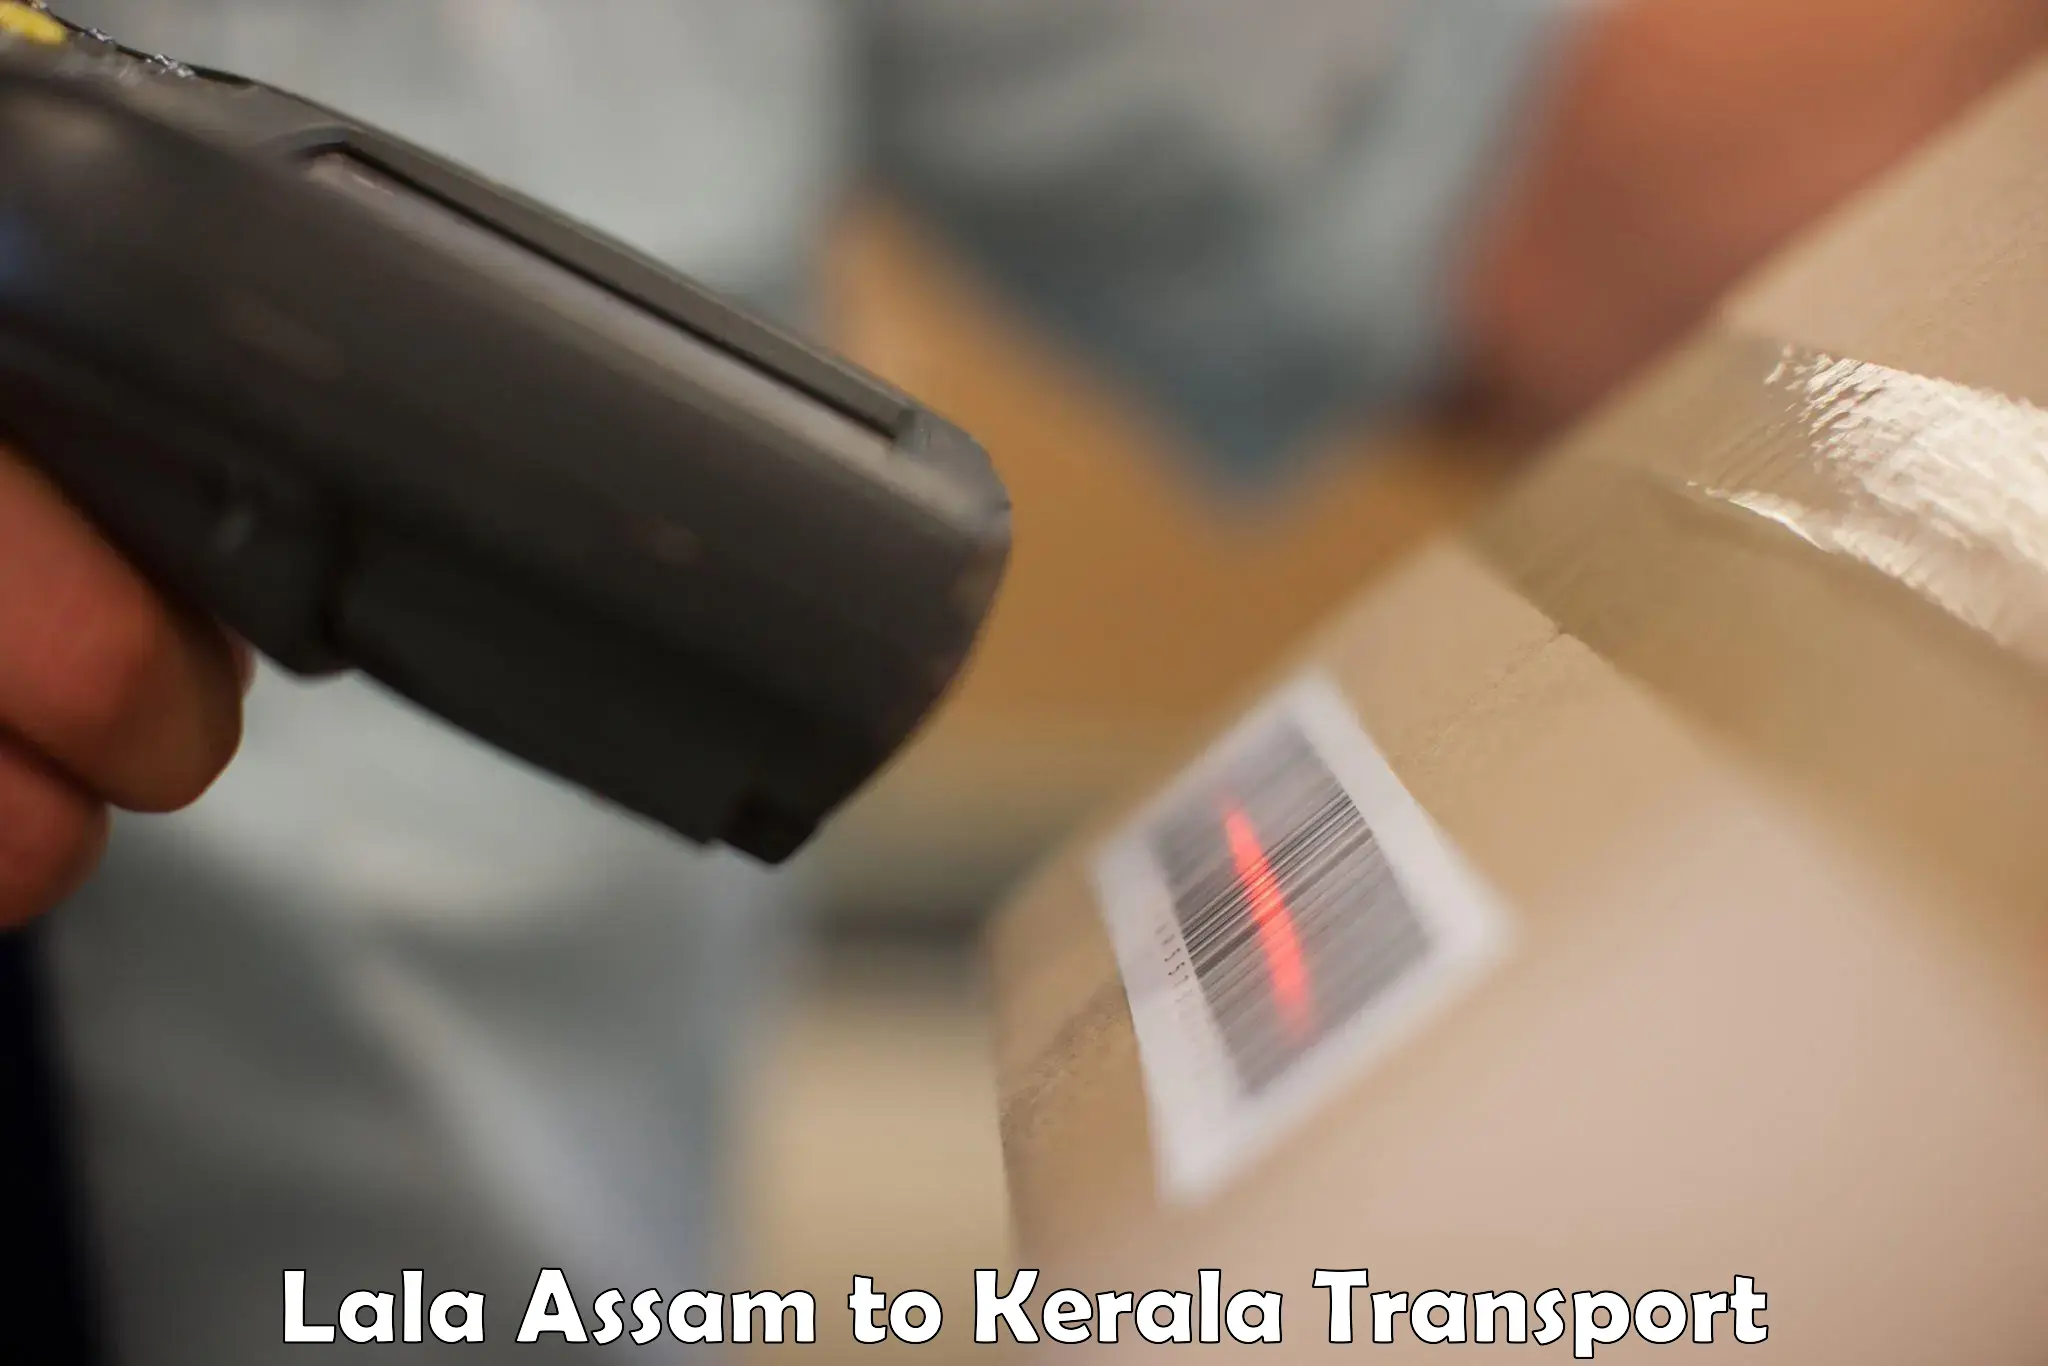 Delivery service Lala Assam to Kerala